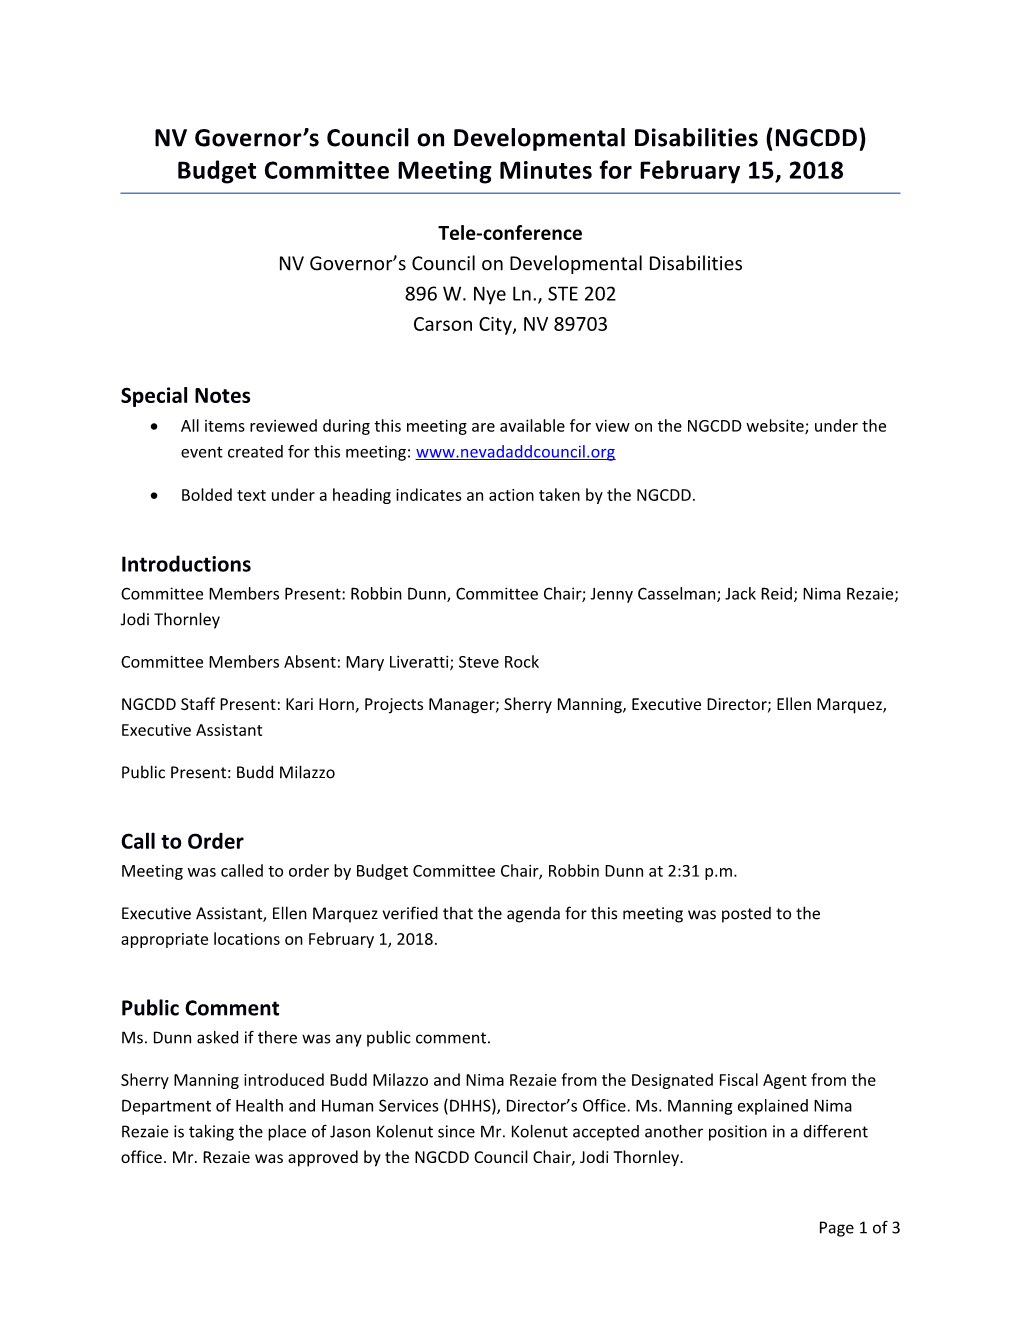 NV Governor S Council on Developmental Disabilities (NGCDD)Budget Committee Meeting Minutes